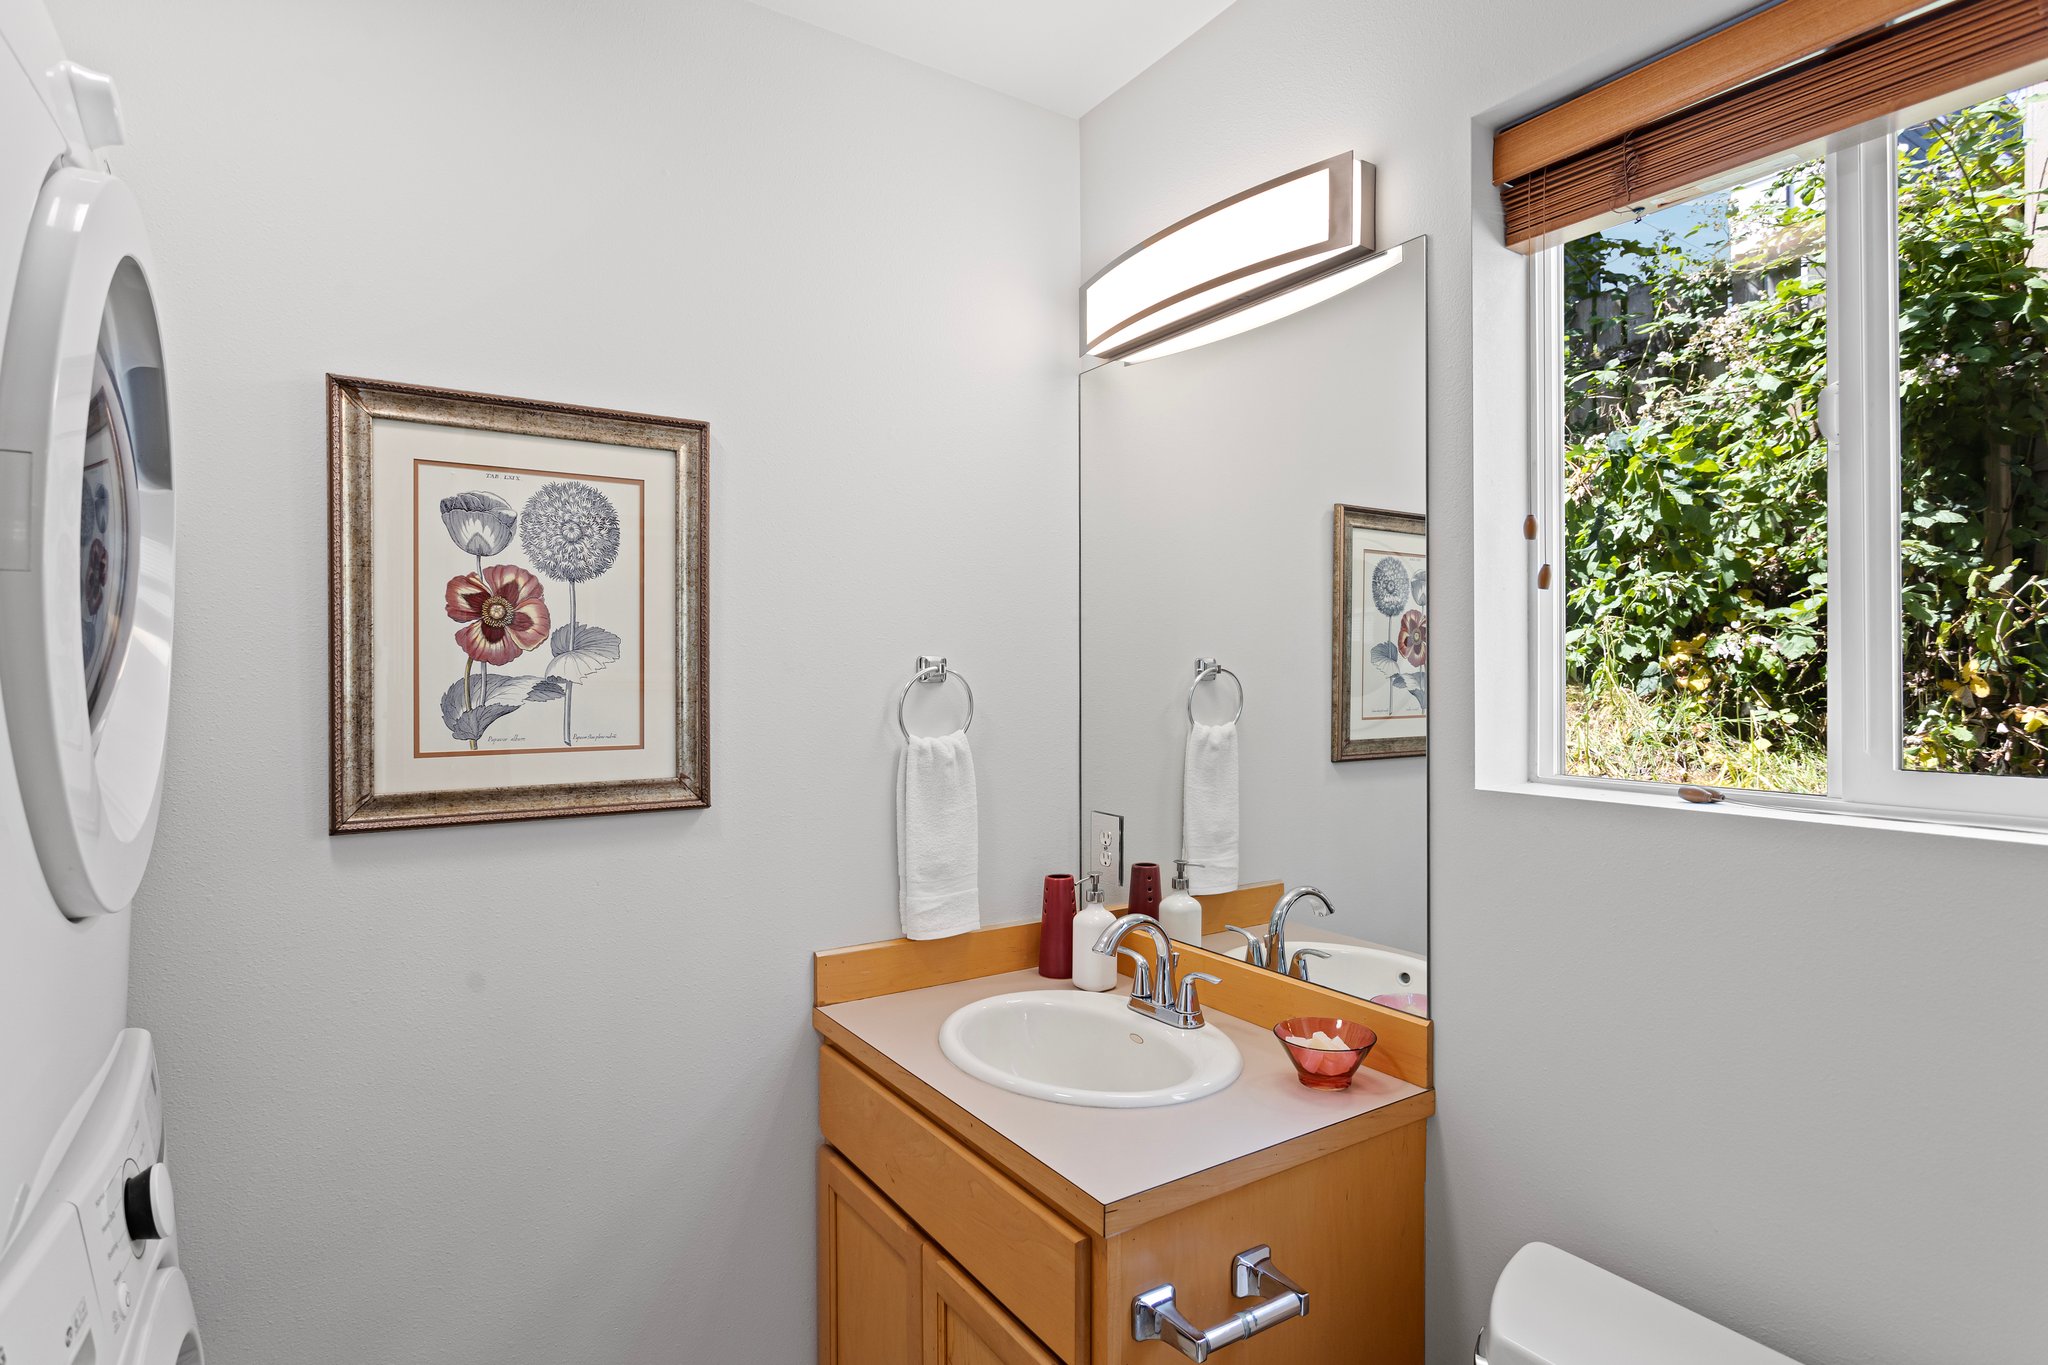 Your guests will appreciate the convenience of the day-lit main floor powder room, featuring…